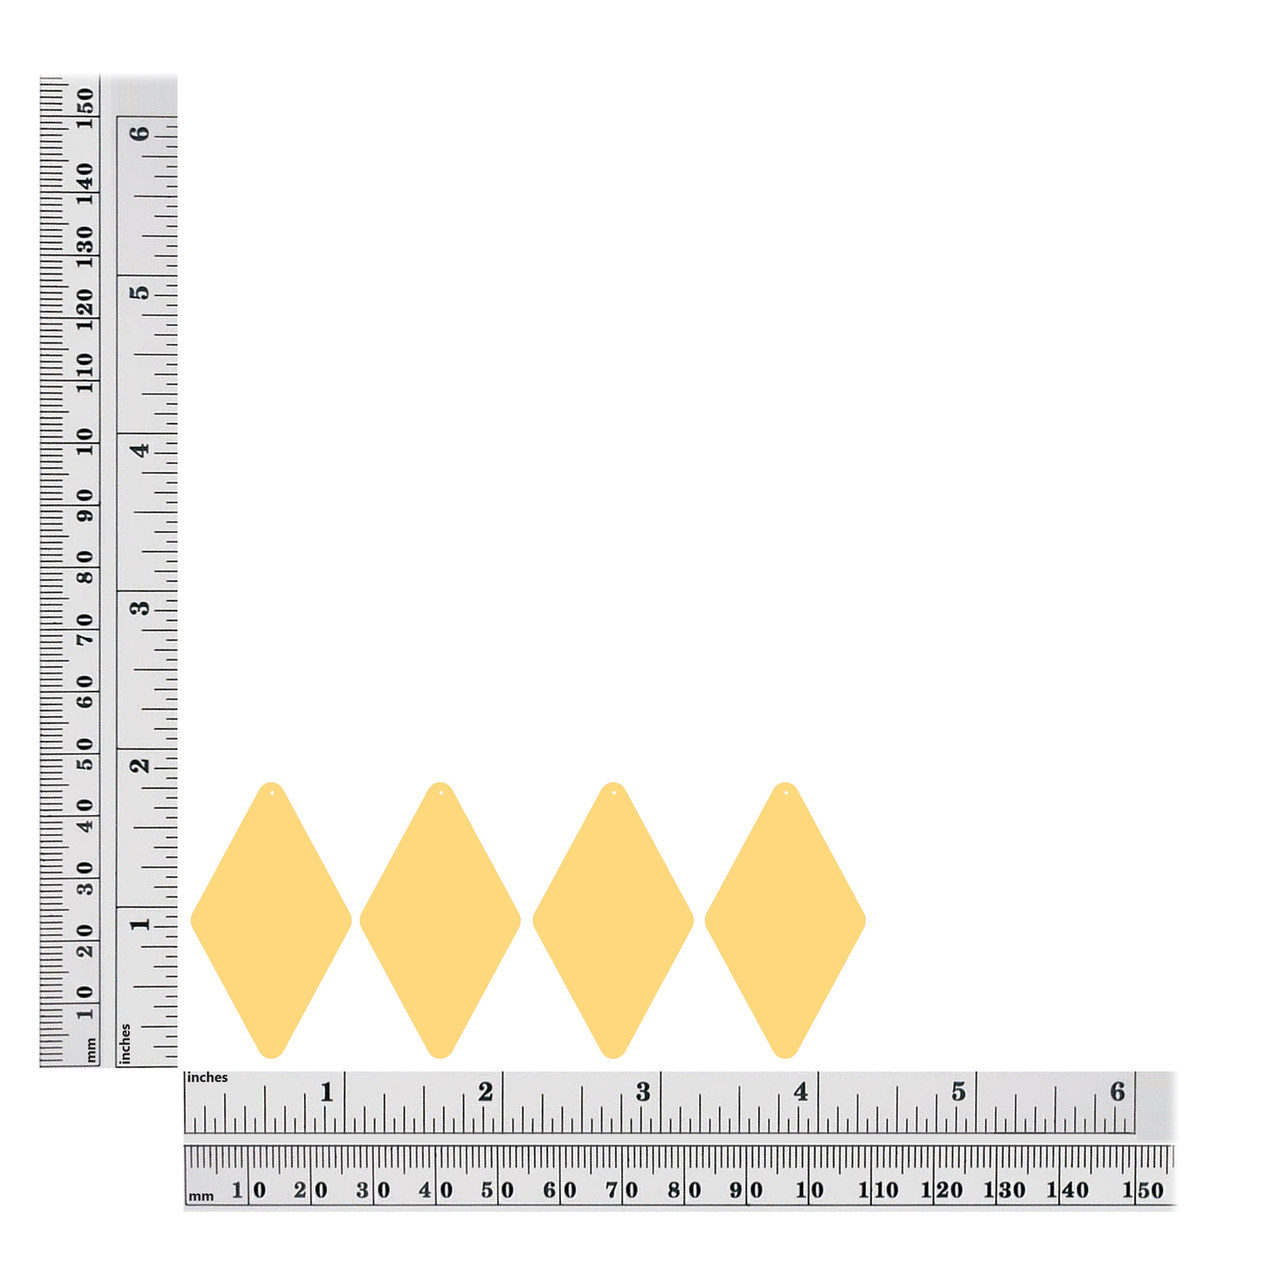 1-75-inch-diamond-sequins size chart